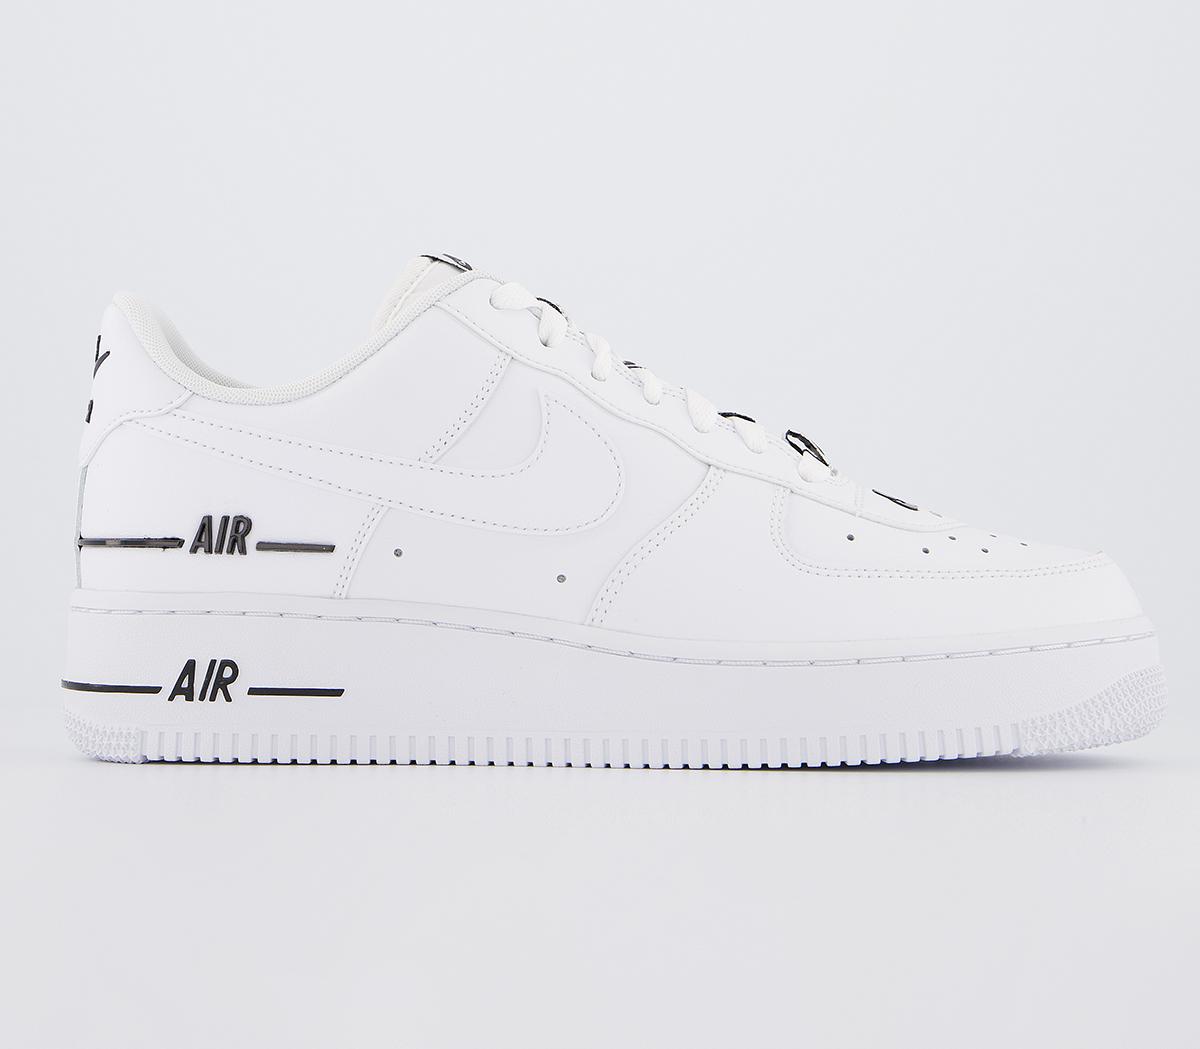 Nike Air Force 1 Lv8 Trainers White White Black - His trainers